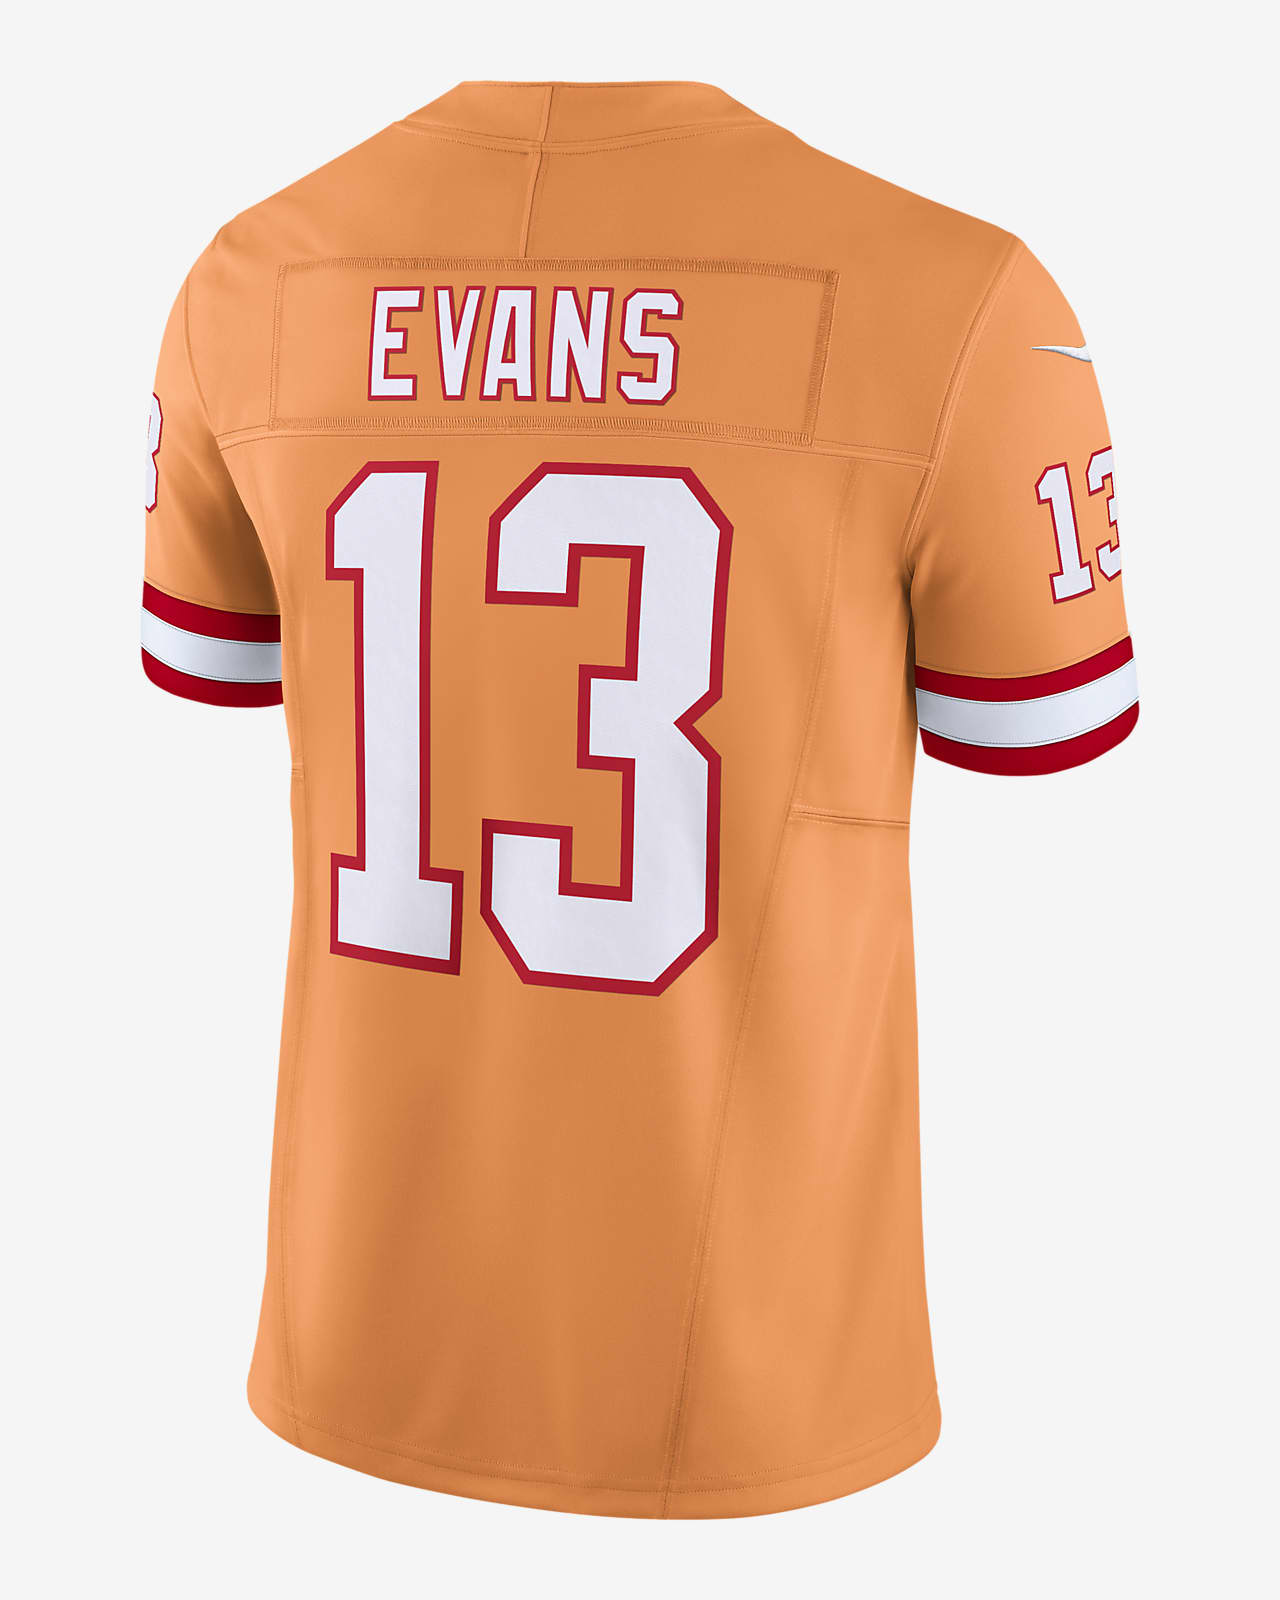 Mike Evans Tampa Bay Buccaneers Men's Nike Dri-FIT NFL Limited Football  Jersey